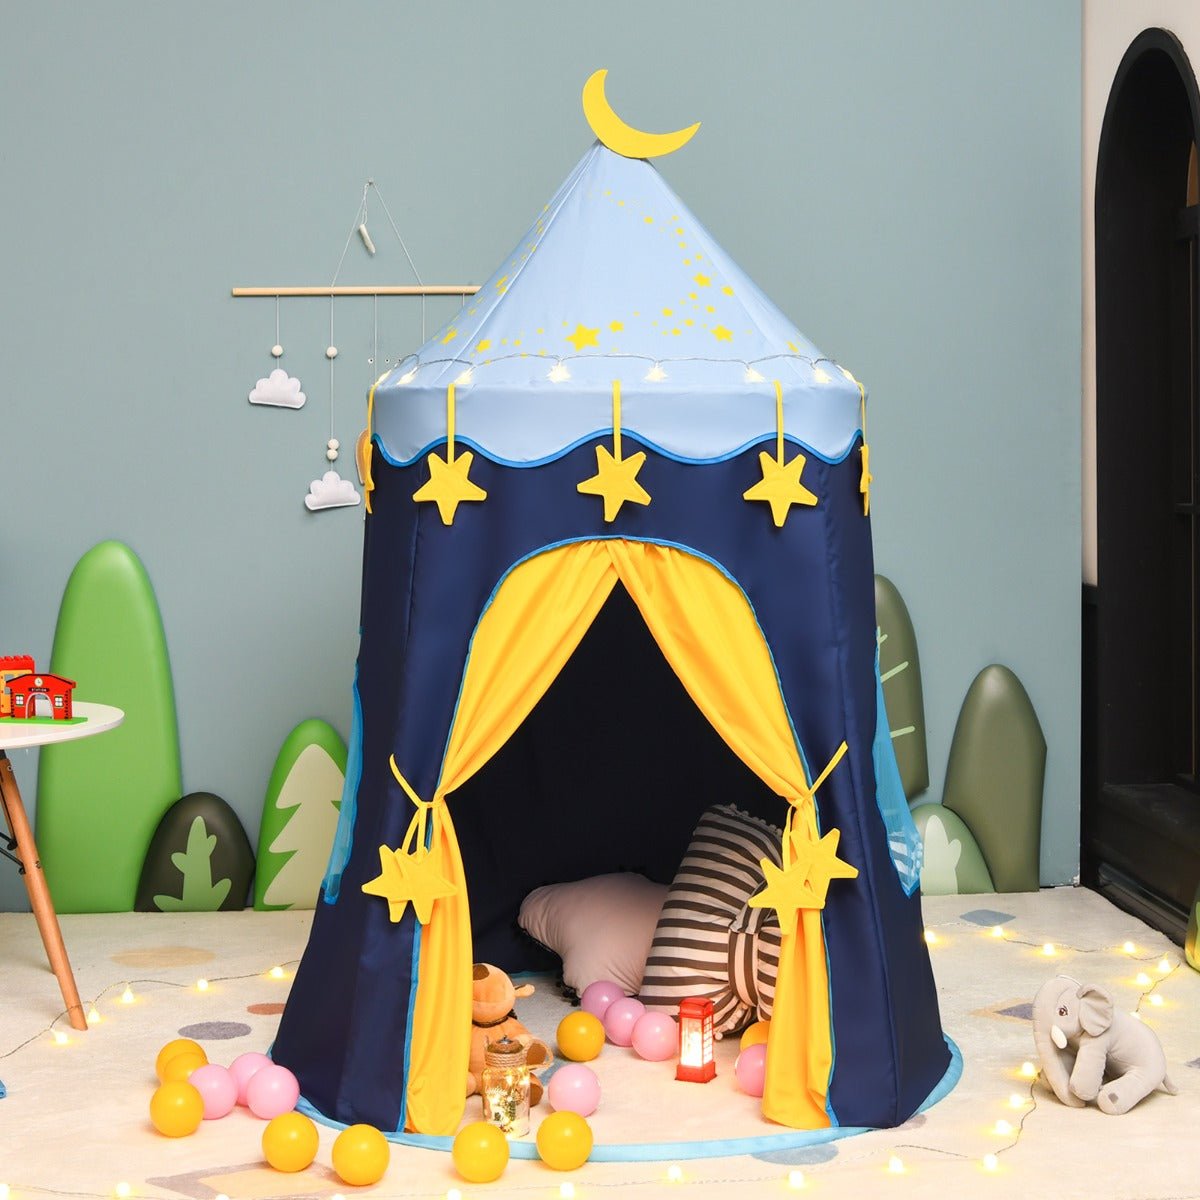 Kids Pop Up Play Tent: Magical Starry Adventure with Lights & Bag